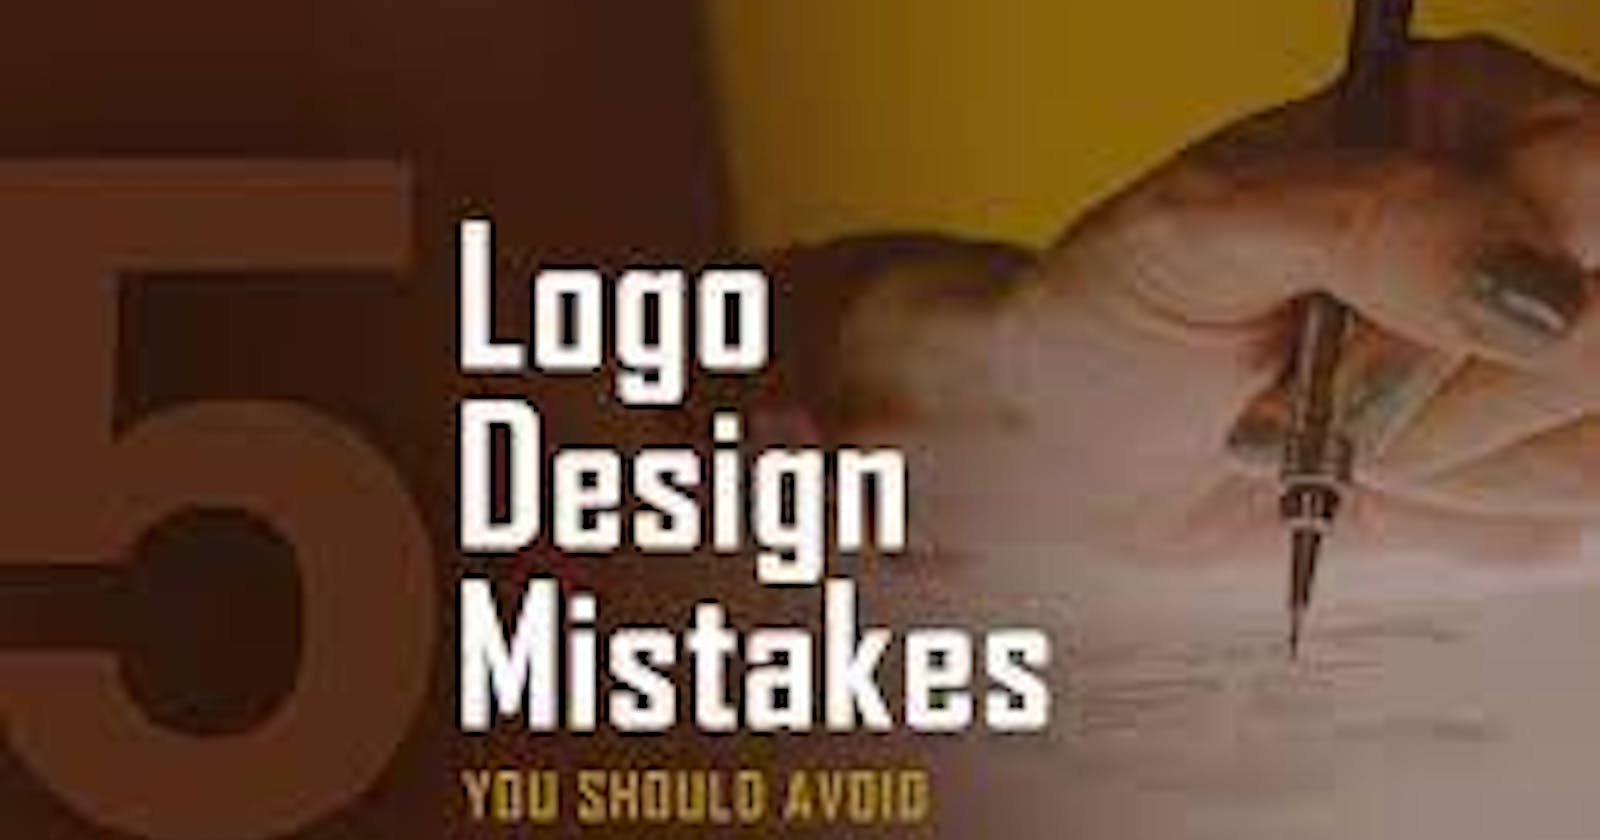 Worst Mistakes All Logo Design Experts Should Avoid